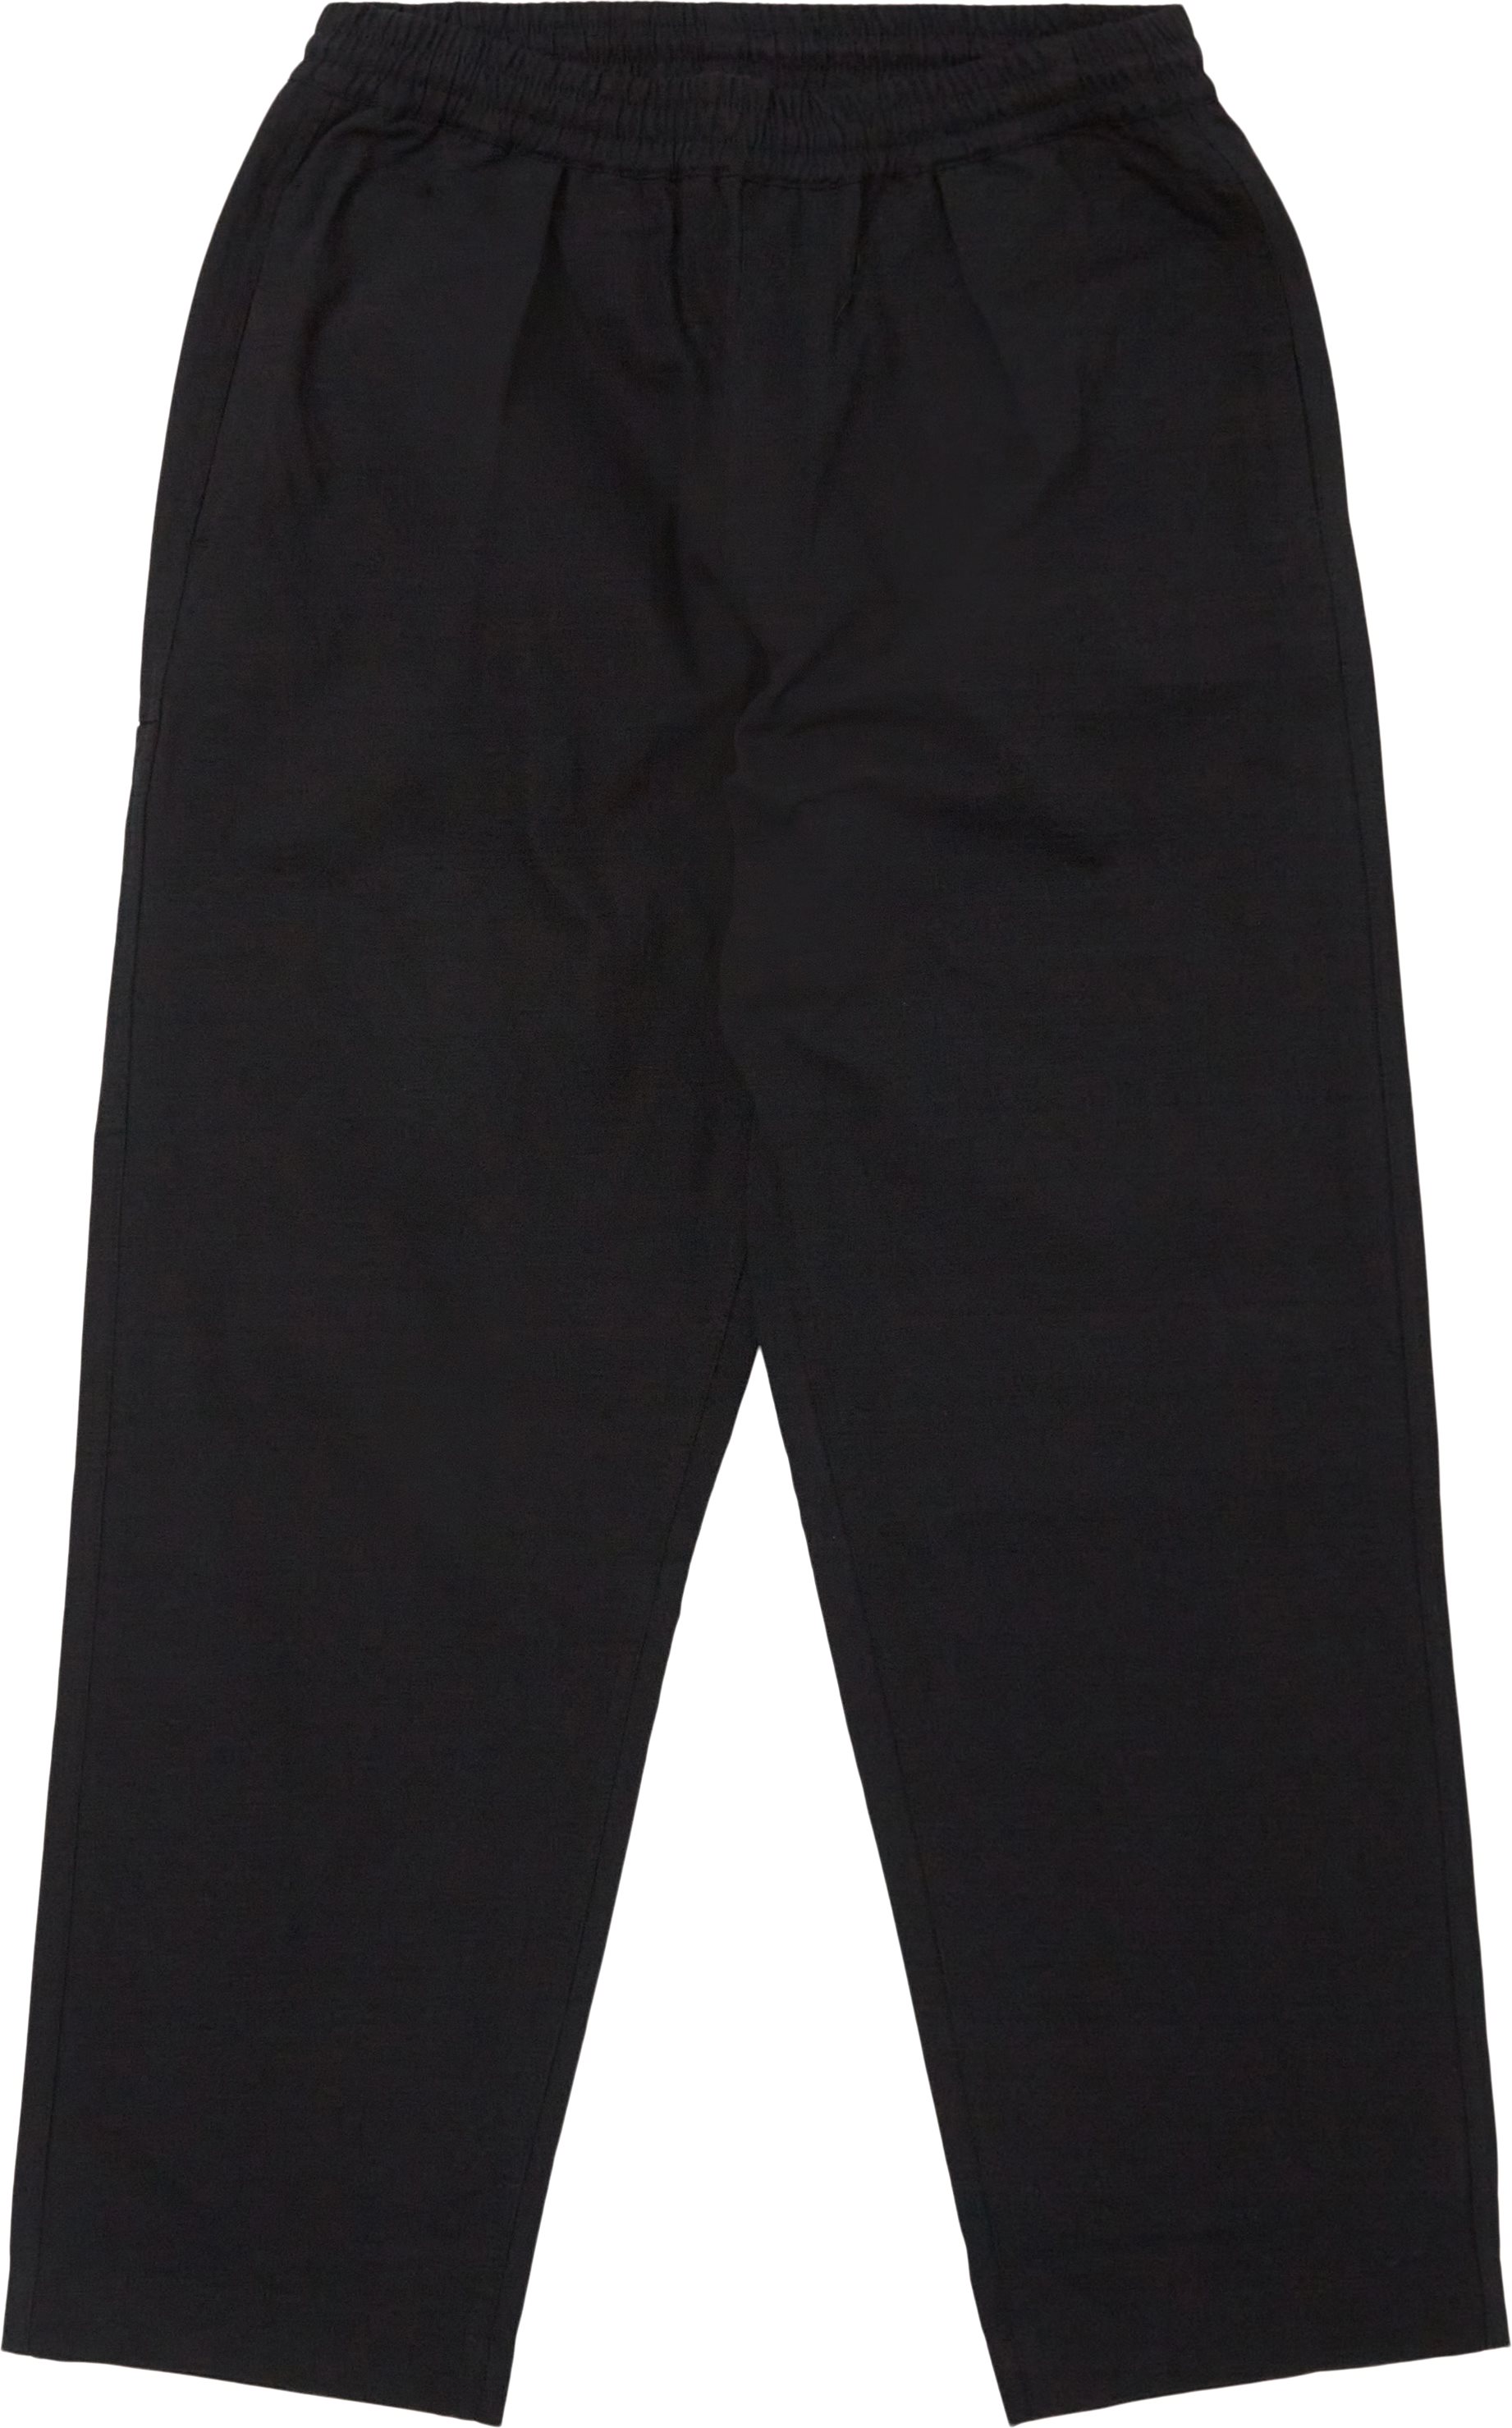 Huf Leisure Skate Pant - Trousers - Baggy fit - Black